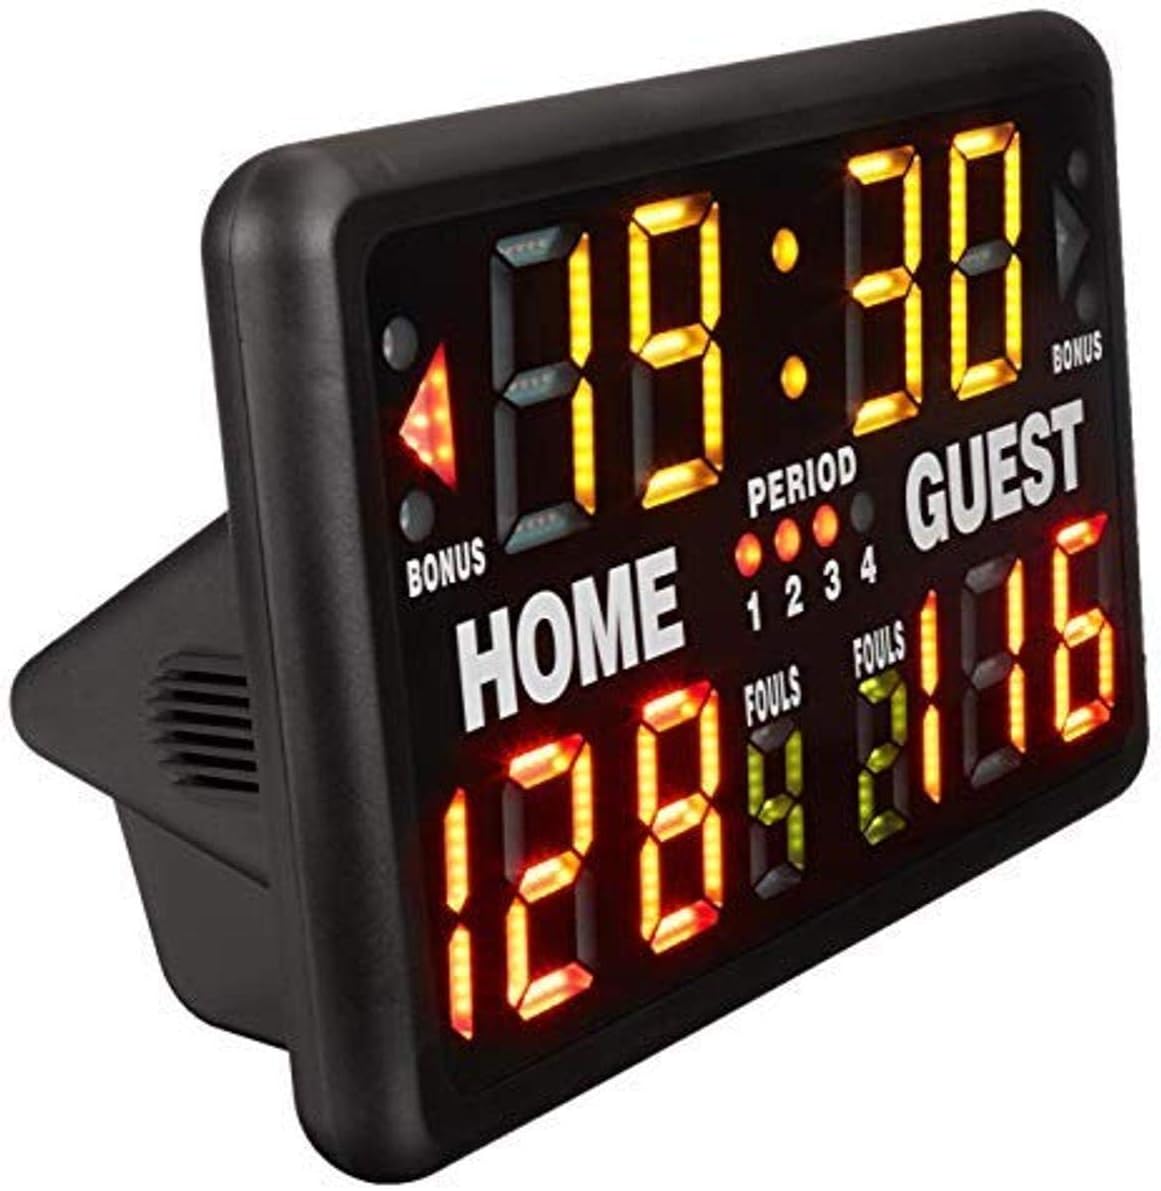 Top 7 budget-friendly portable scoreboards for sports, under $300. this guide details features & limitations to allow you to pick the best one